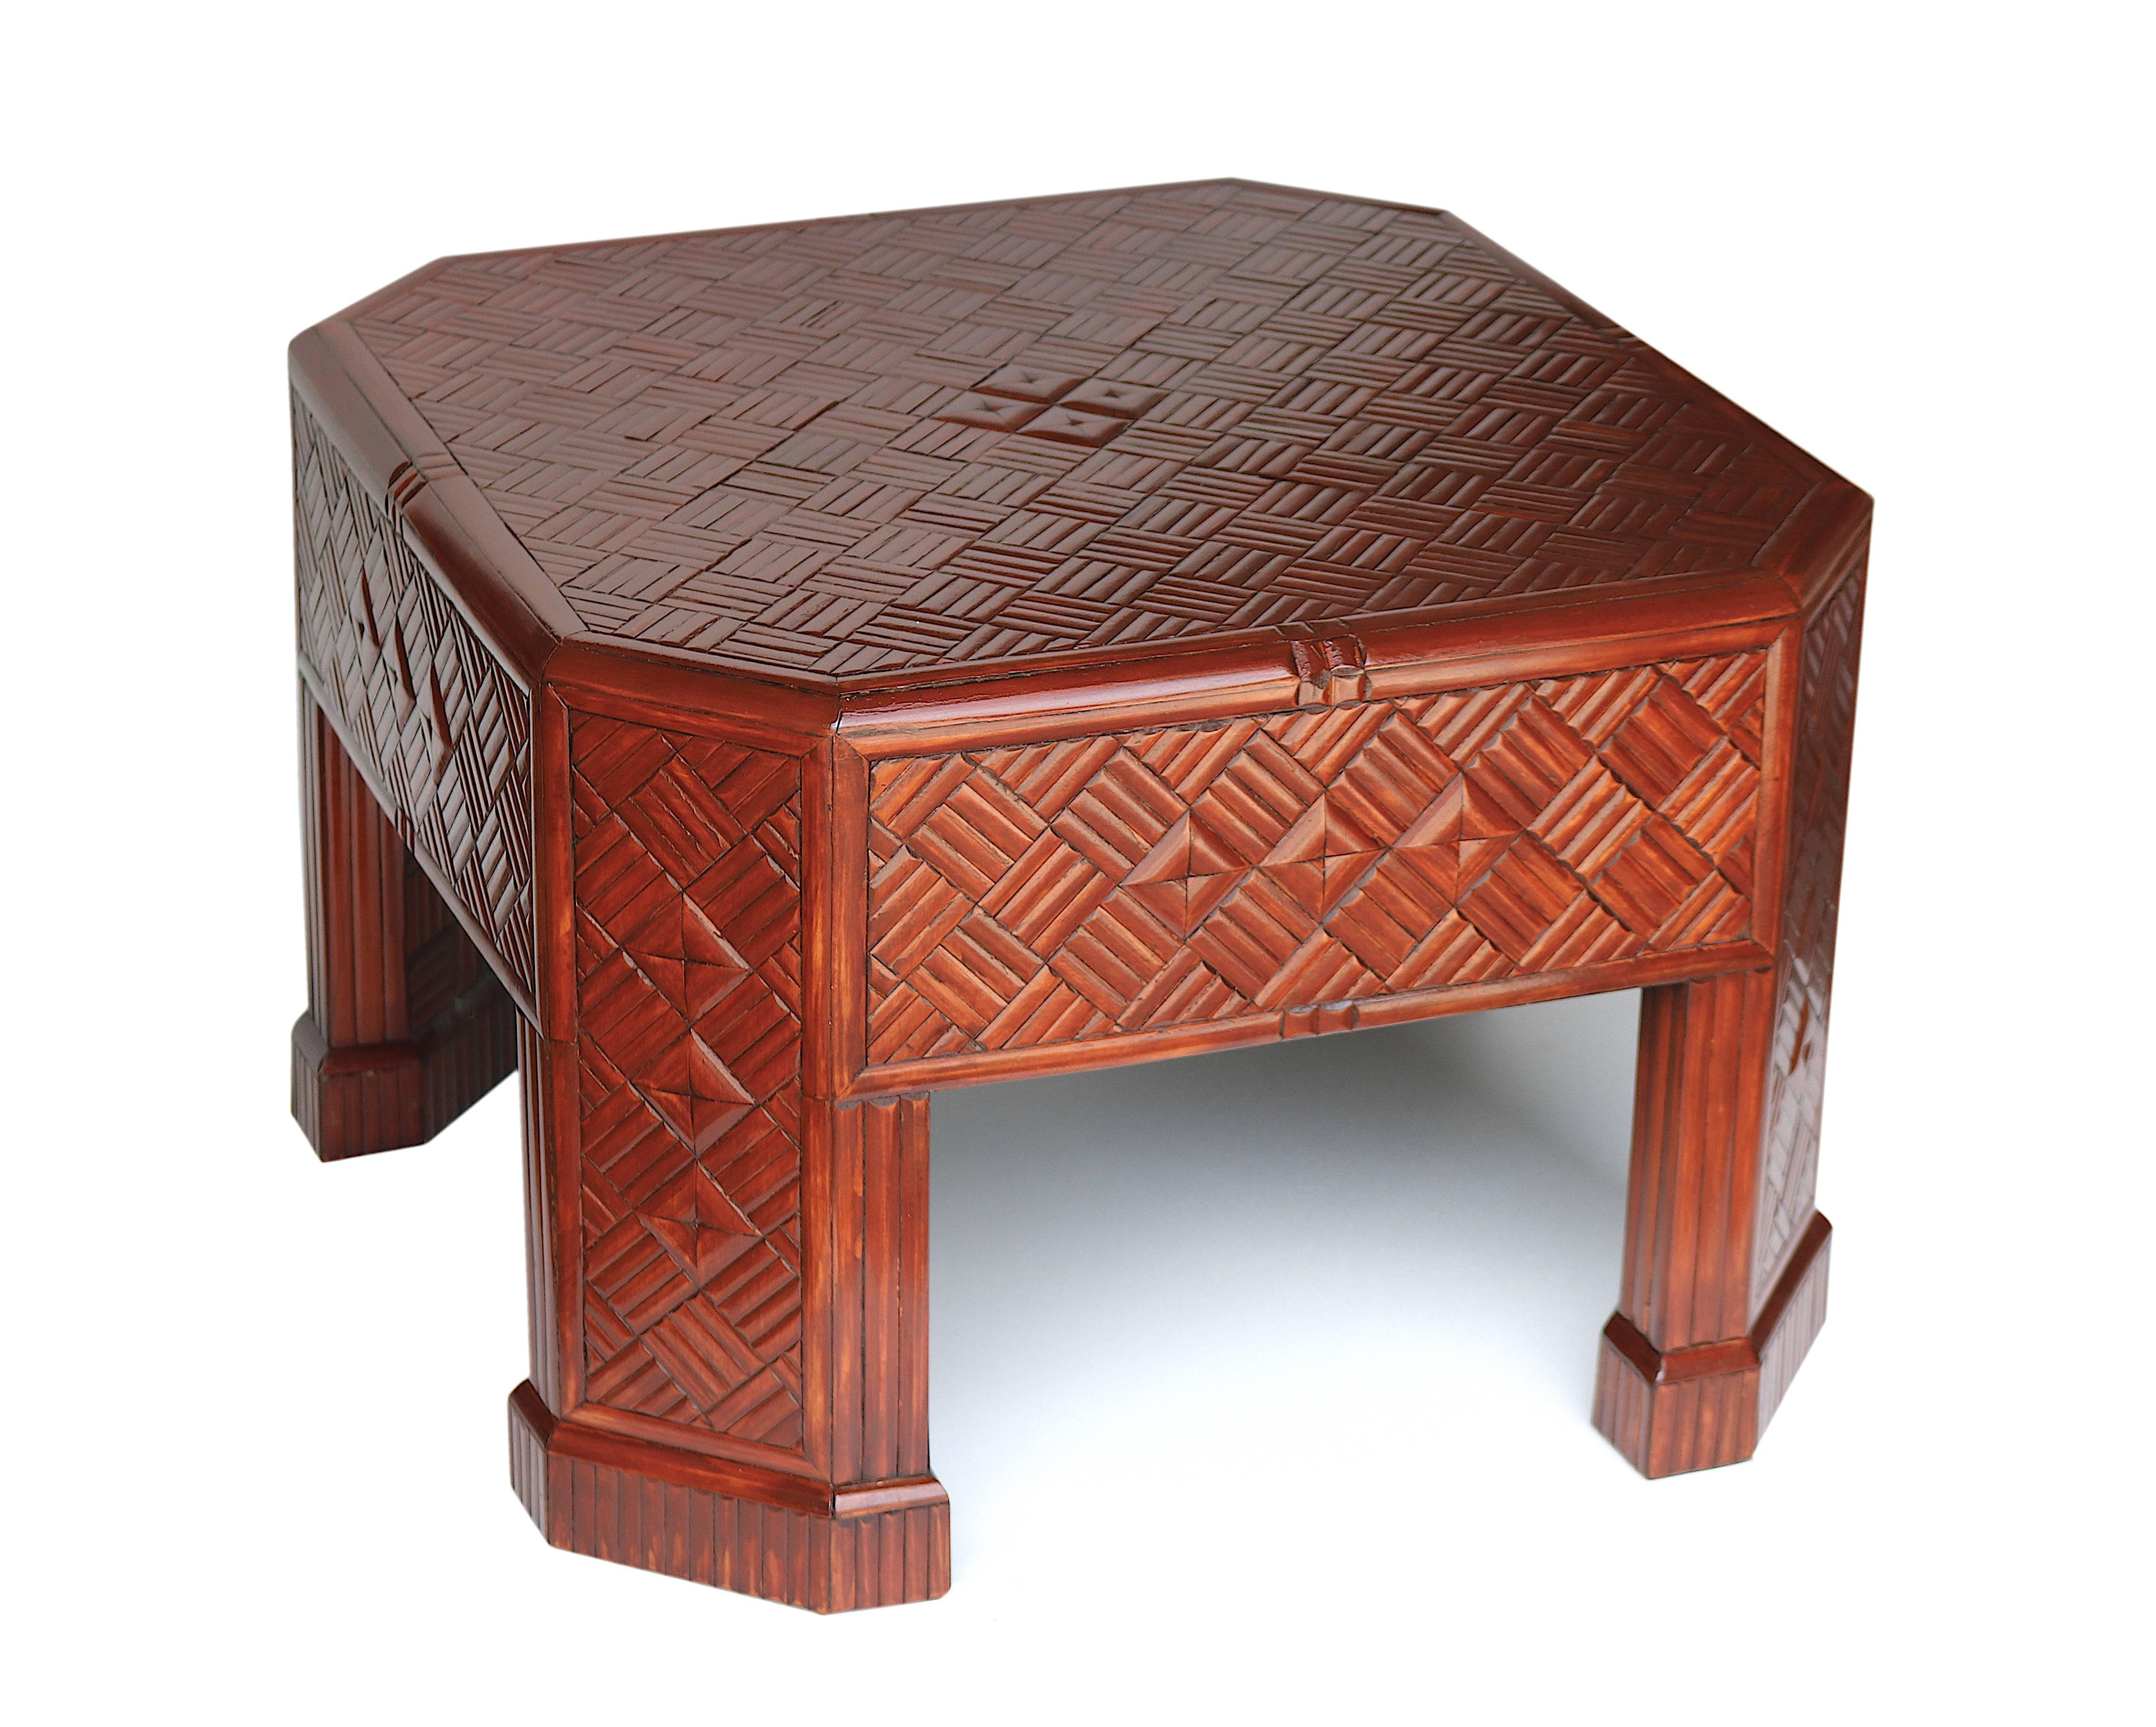 Unique great design cocktail table. Impeccably fabricated split bamboo patterned octagon shape cocktail coffee table with elegant diamond bamboo inlays set in diagonal basket weave pattern and molding trim on top, sides, legs and interior of legs.